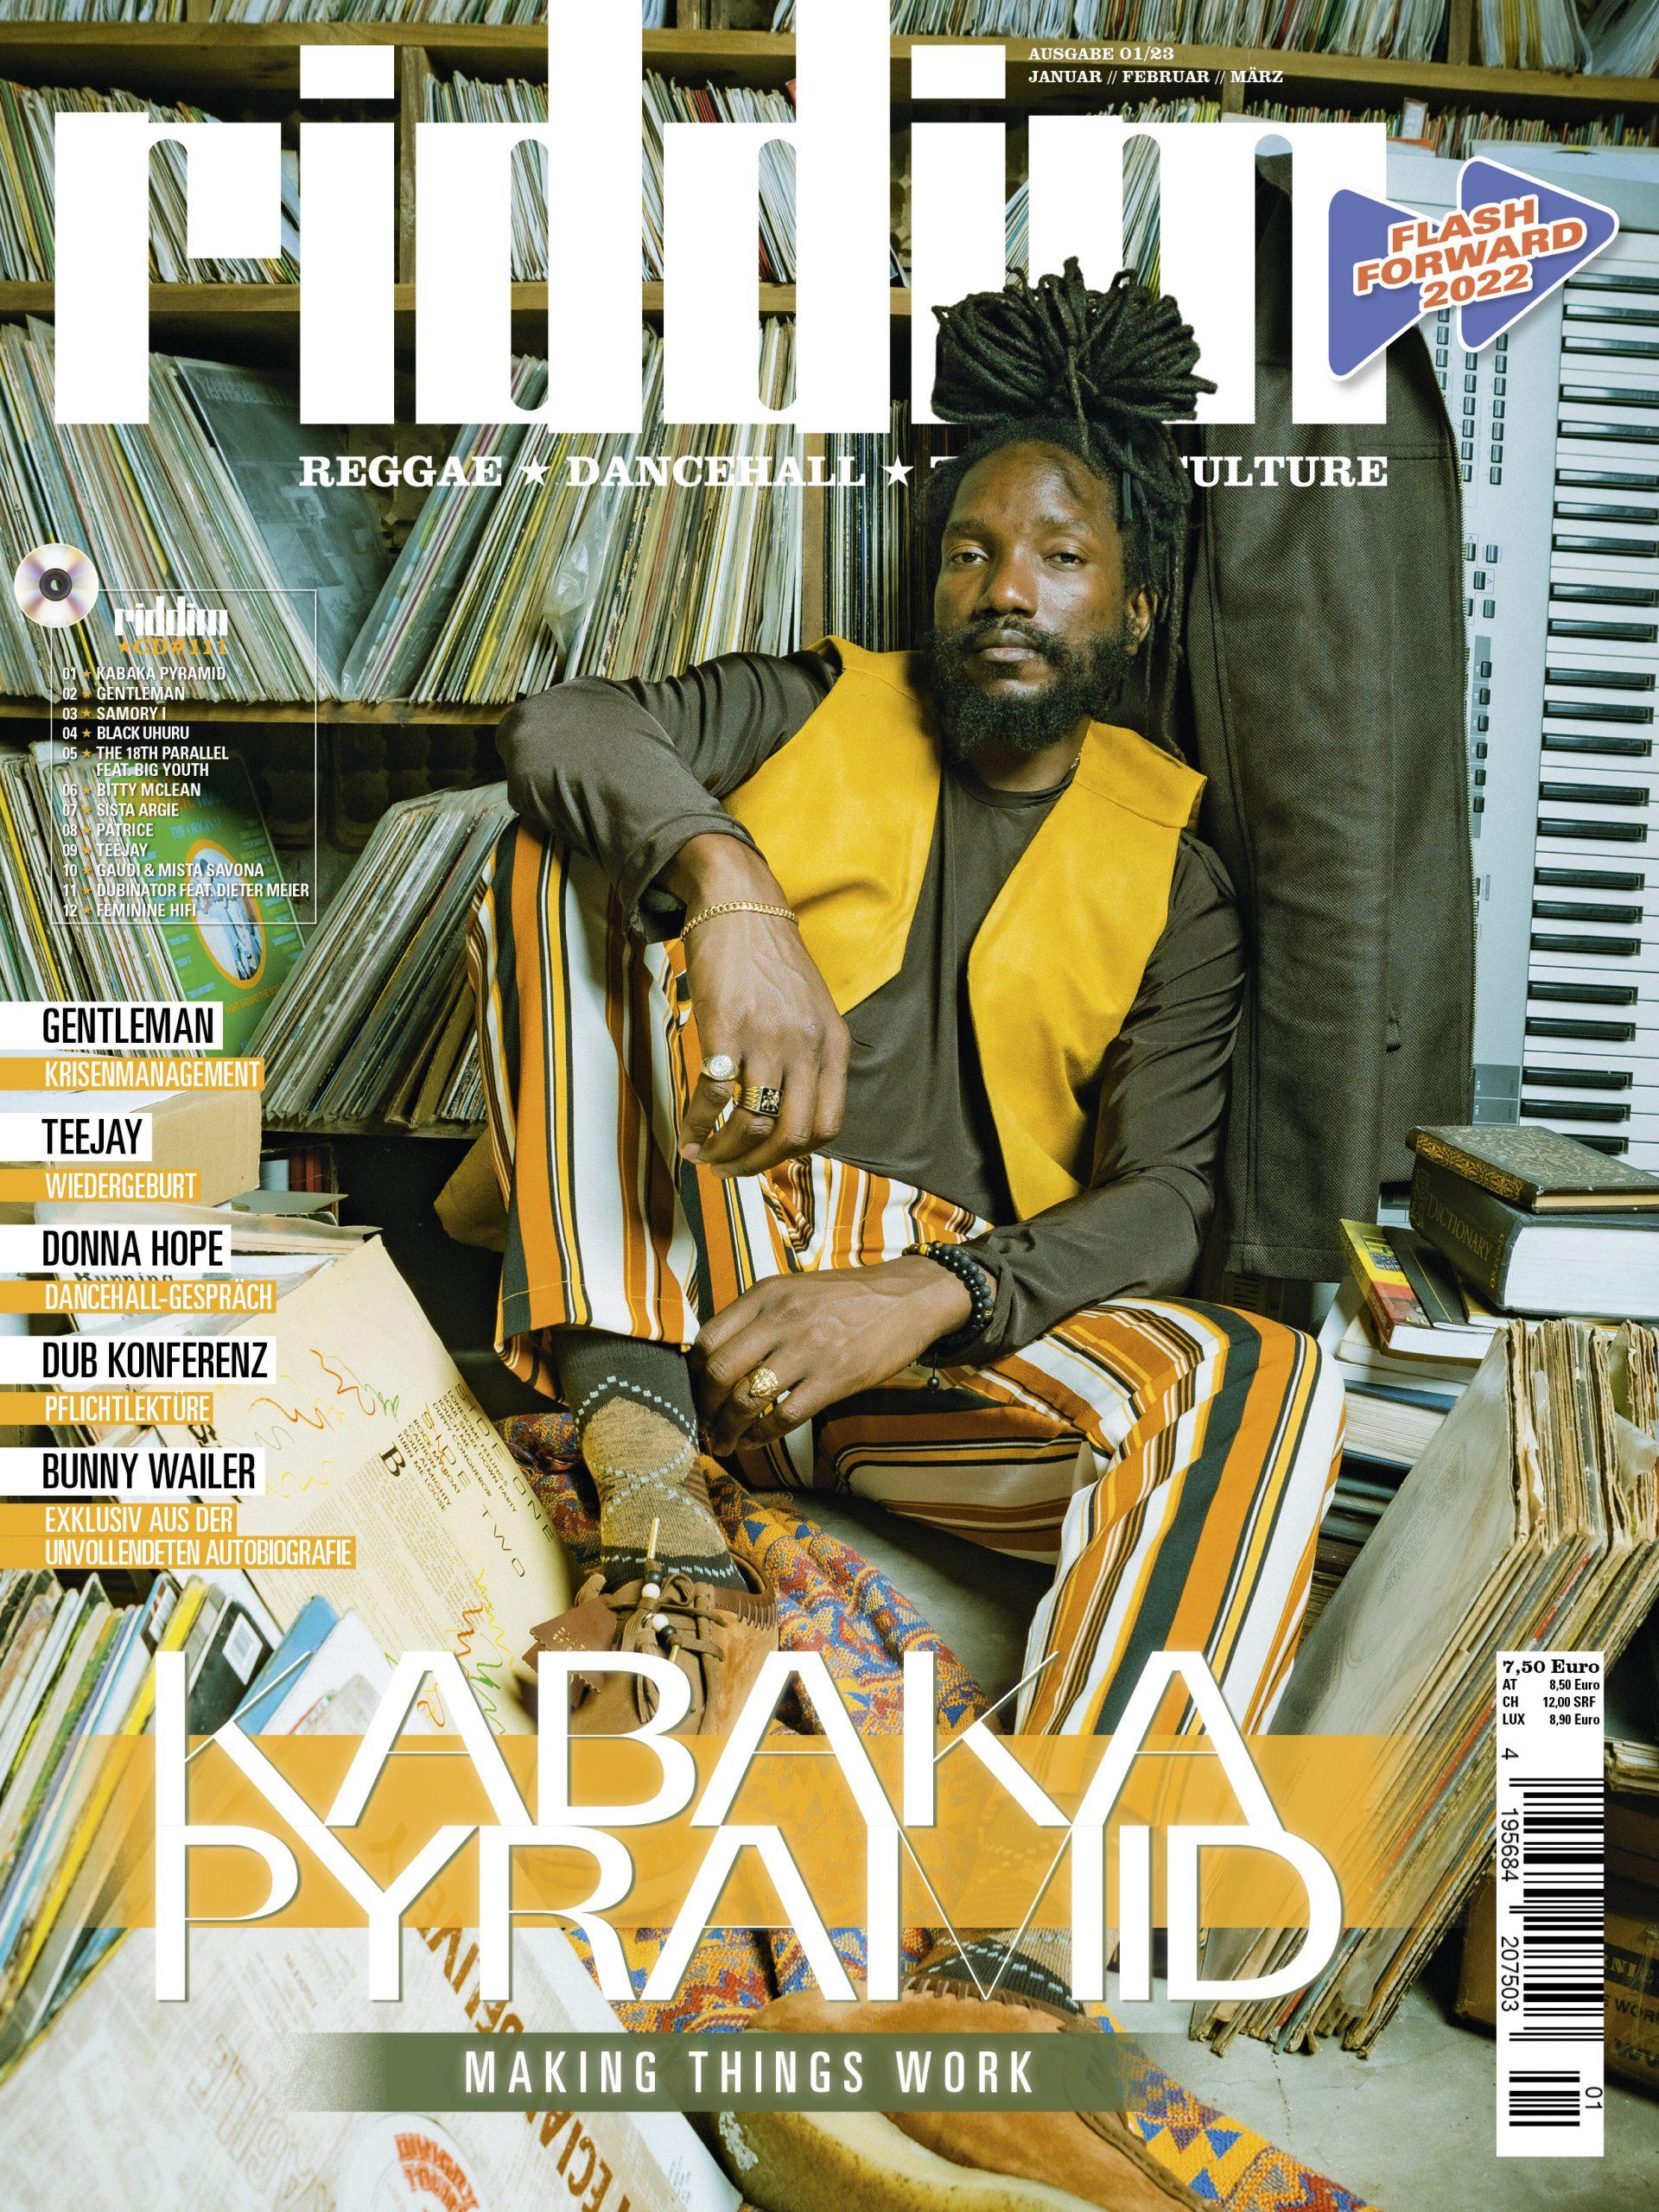 Kabaka Pyramid - Making Things Work - Bunny Wailer - Battering Down Sentence: Exclusive from the Unpublished Autobiography - Gentleman - Crisis Management - Teejay - Rebirth - Dub Conference - Essential Reading - Donna Hope - Dancehall Talk